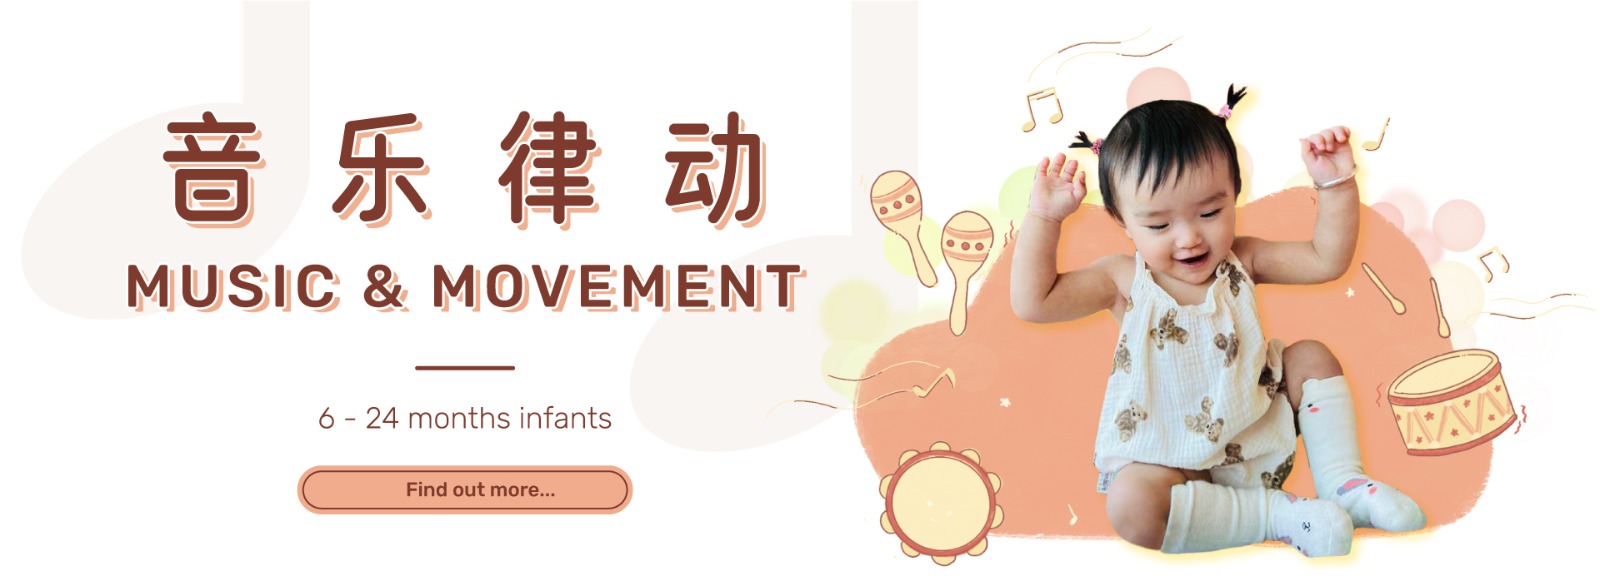 Music & Movement Adult-accompanied Programme for 6 - 24 months infants for class size 6 - 8 infants for 45 minutes.